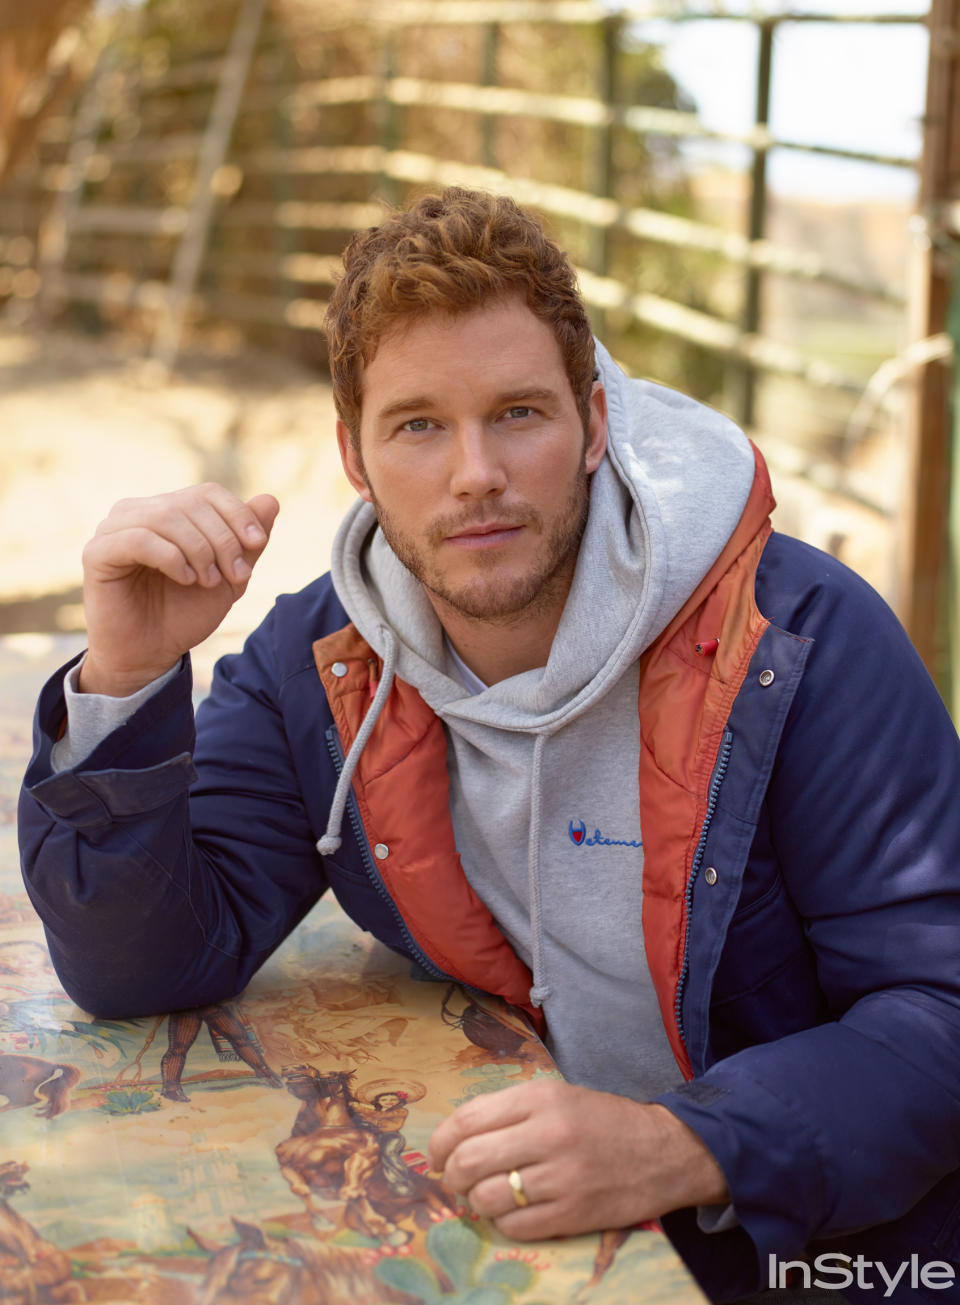 Chris Pratt's Instagrams About His InStyle Feature Will Make You Laugh Out Loud